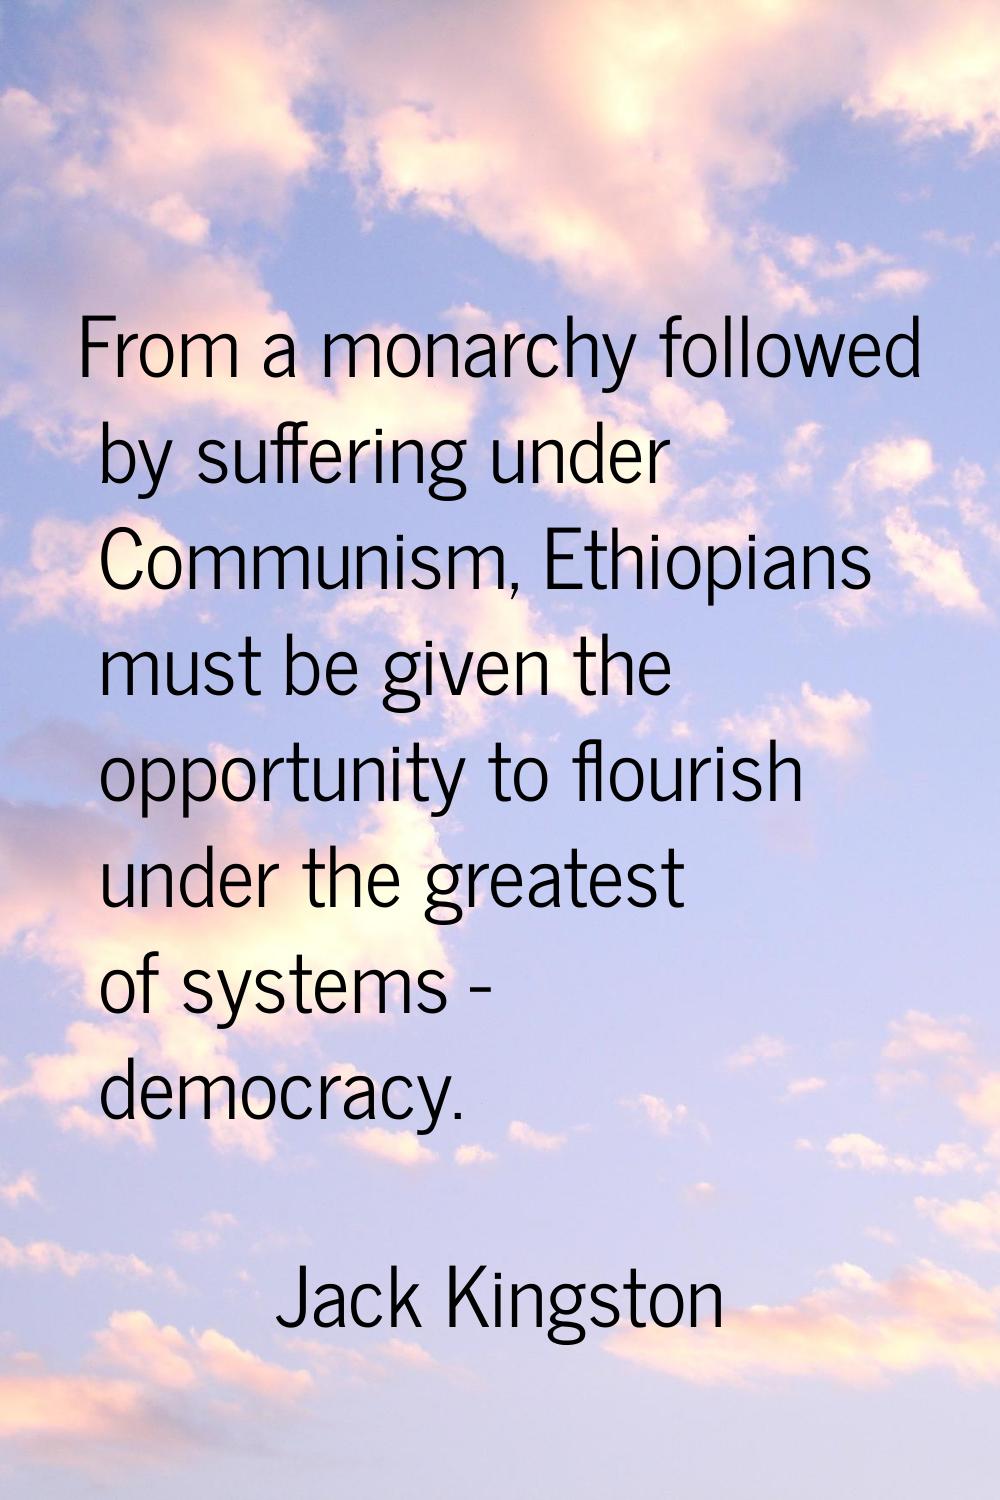 From a monarchy followed by suffering under Communism, Ethiopians must be given the opportunity to 